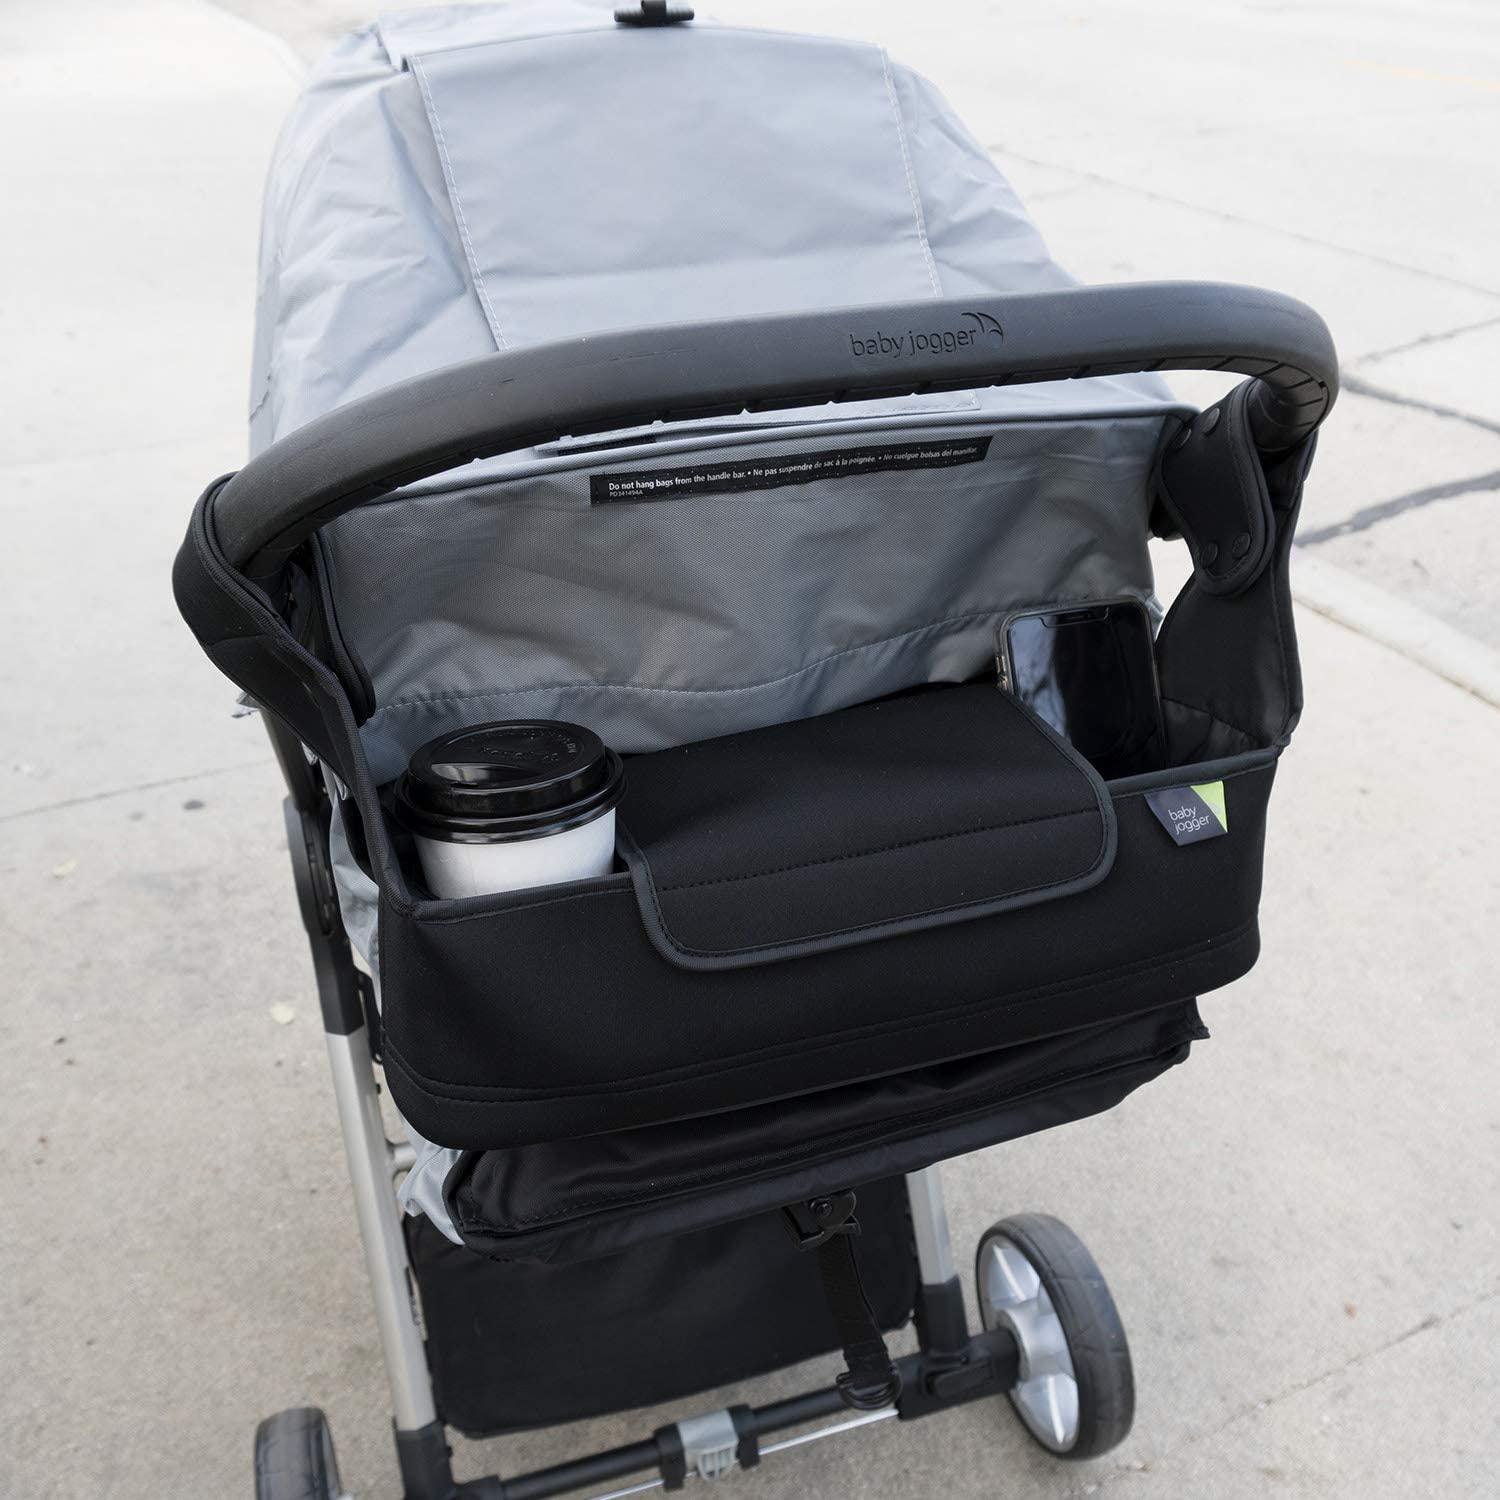 Baby Jogger: parent console for City Select 2 / City Sights stroller